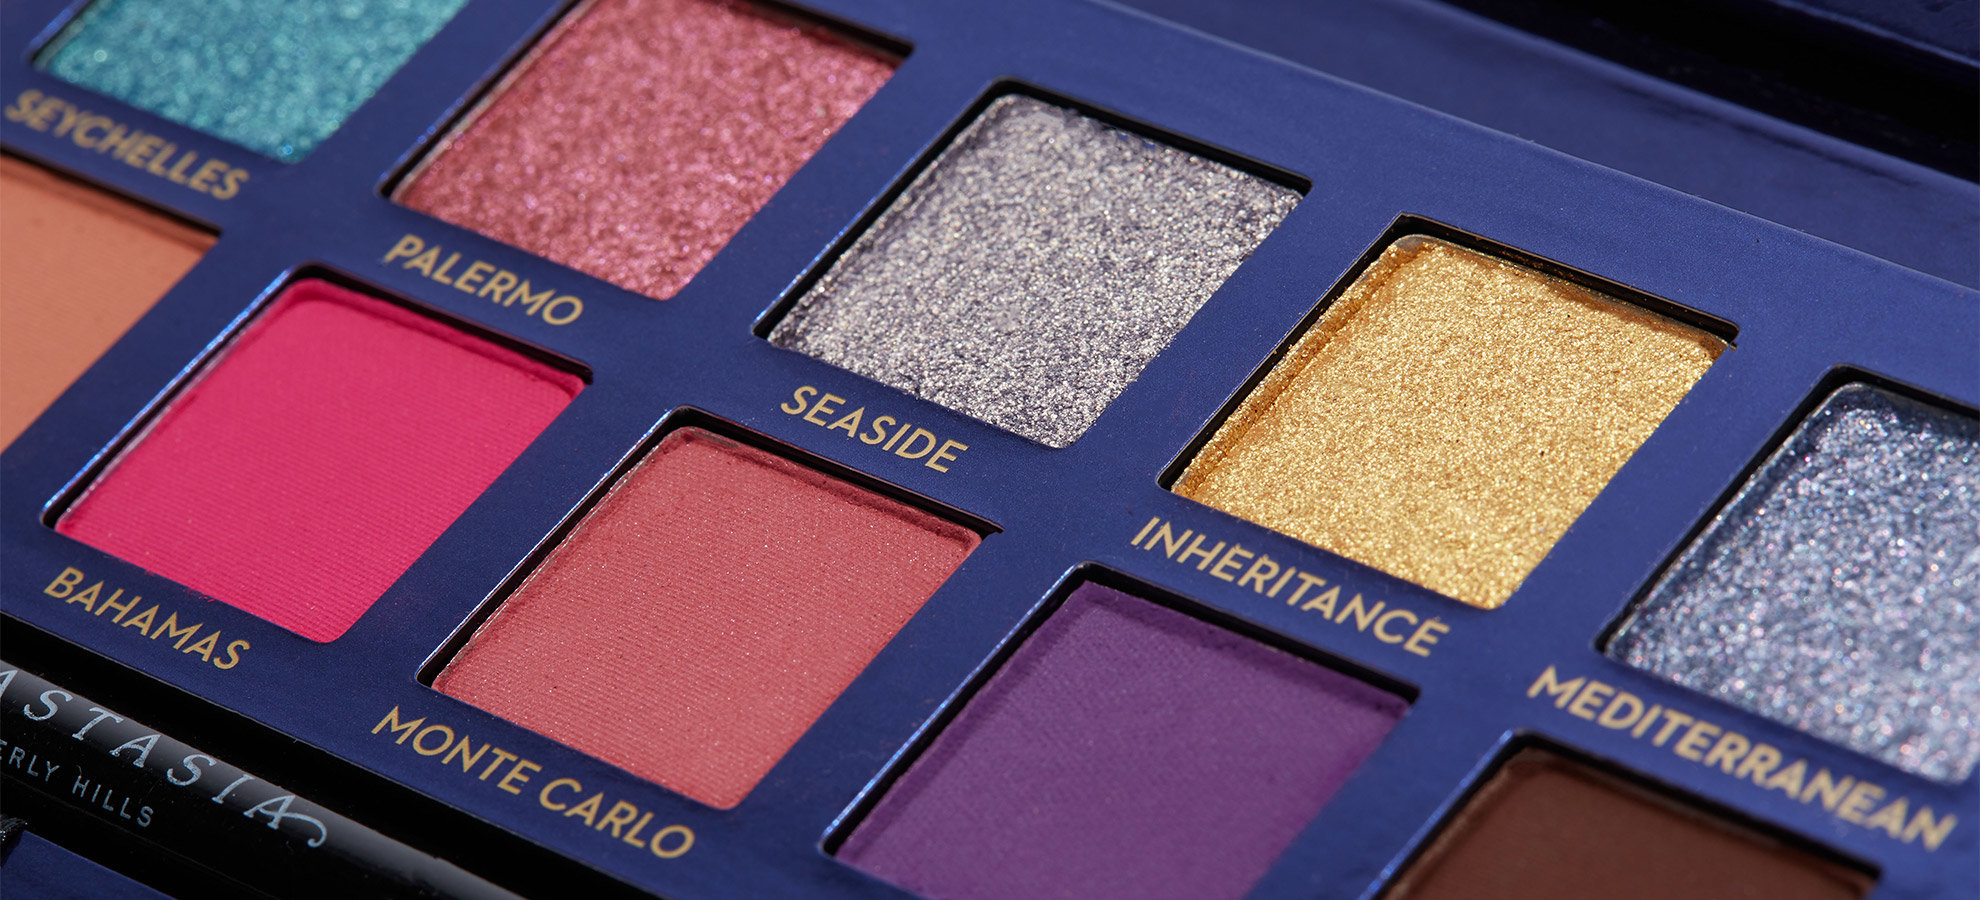 Anastasia Beverly Hills Spring 2019 – New Riviera Palette and More 